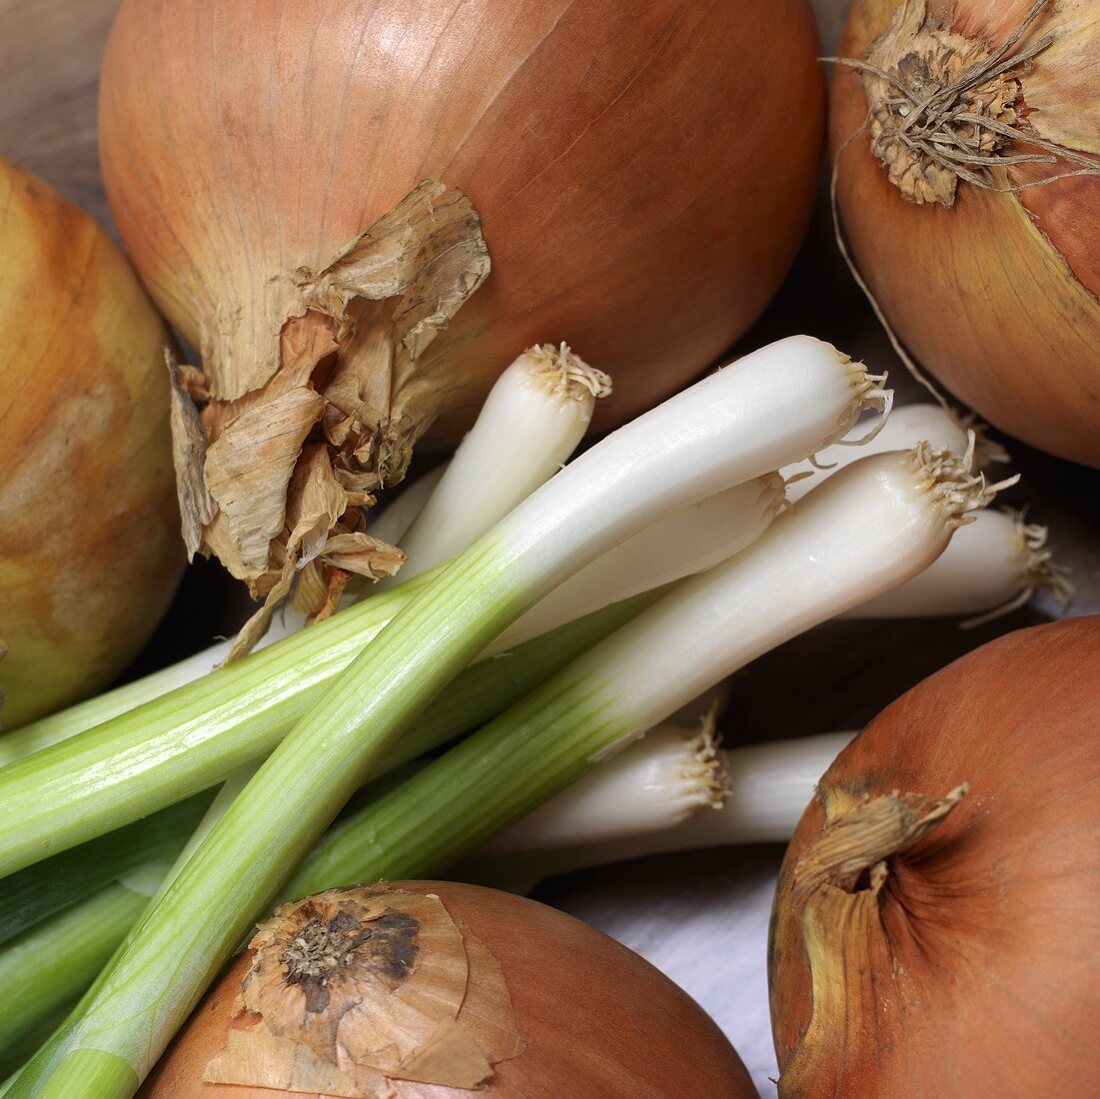 Brown onions and spring onions